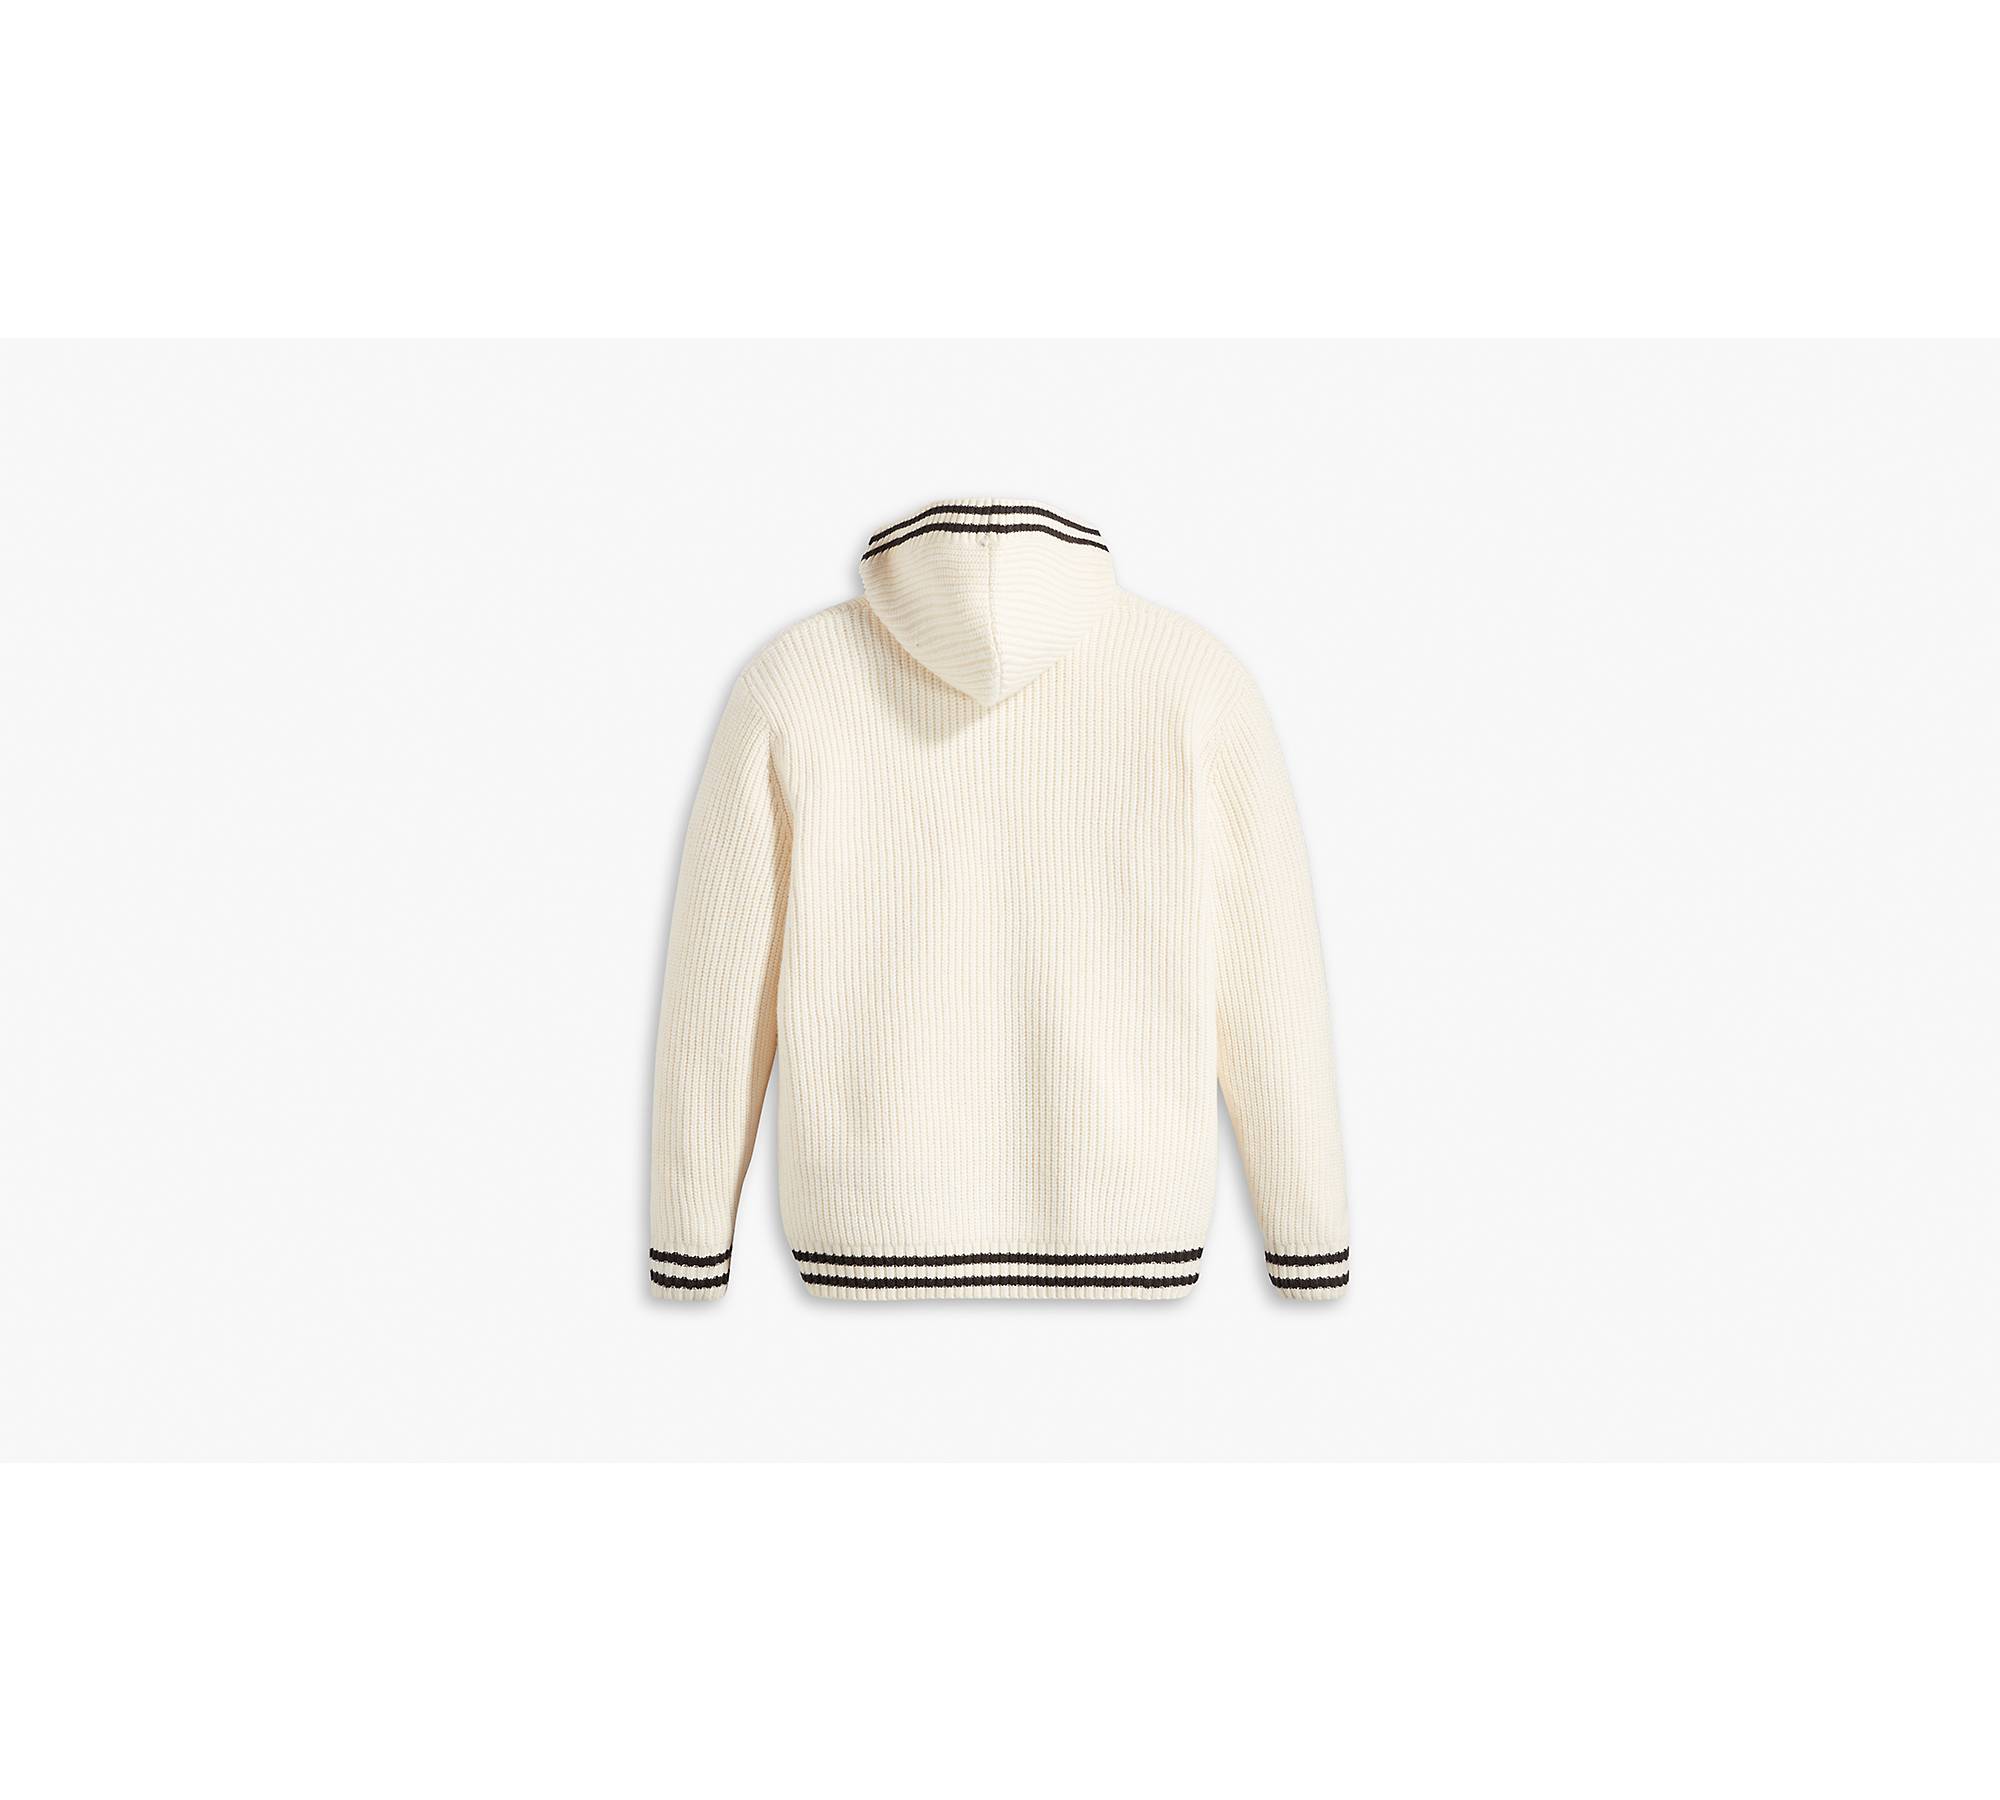 Oversized V-Neck Signature Pullover - Ready-to-Wear